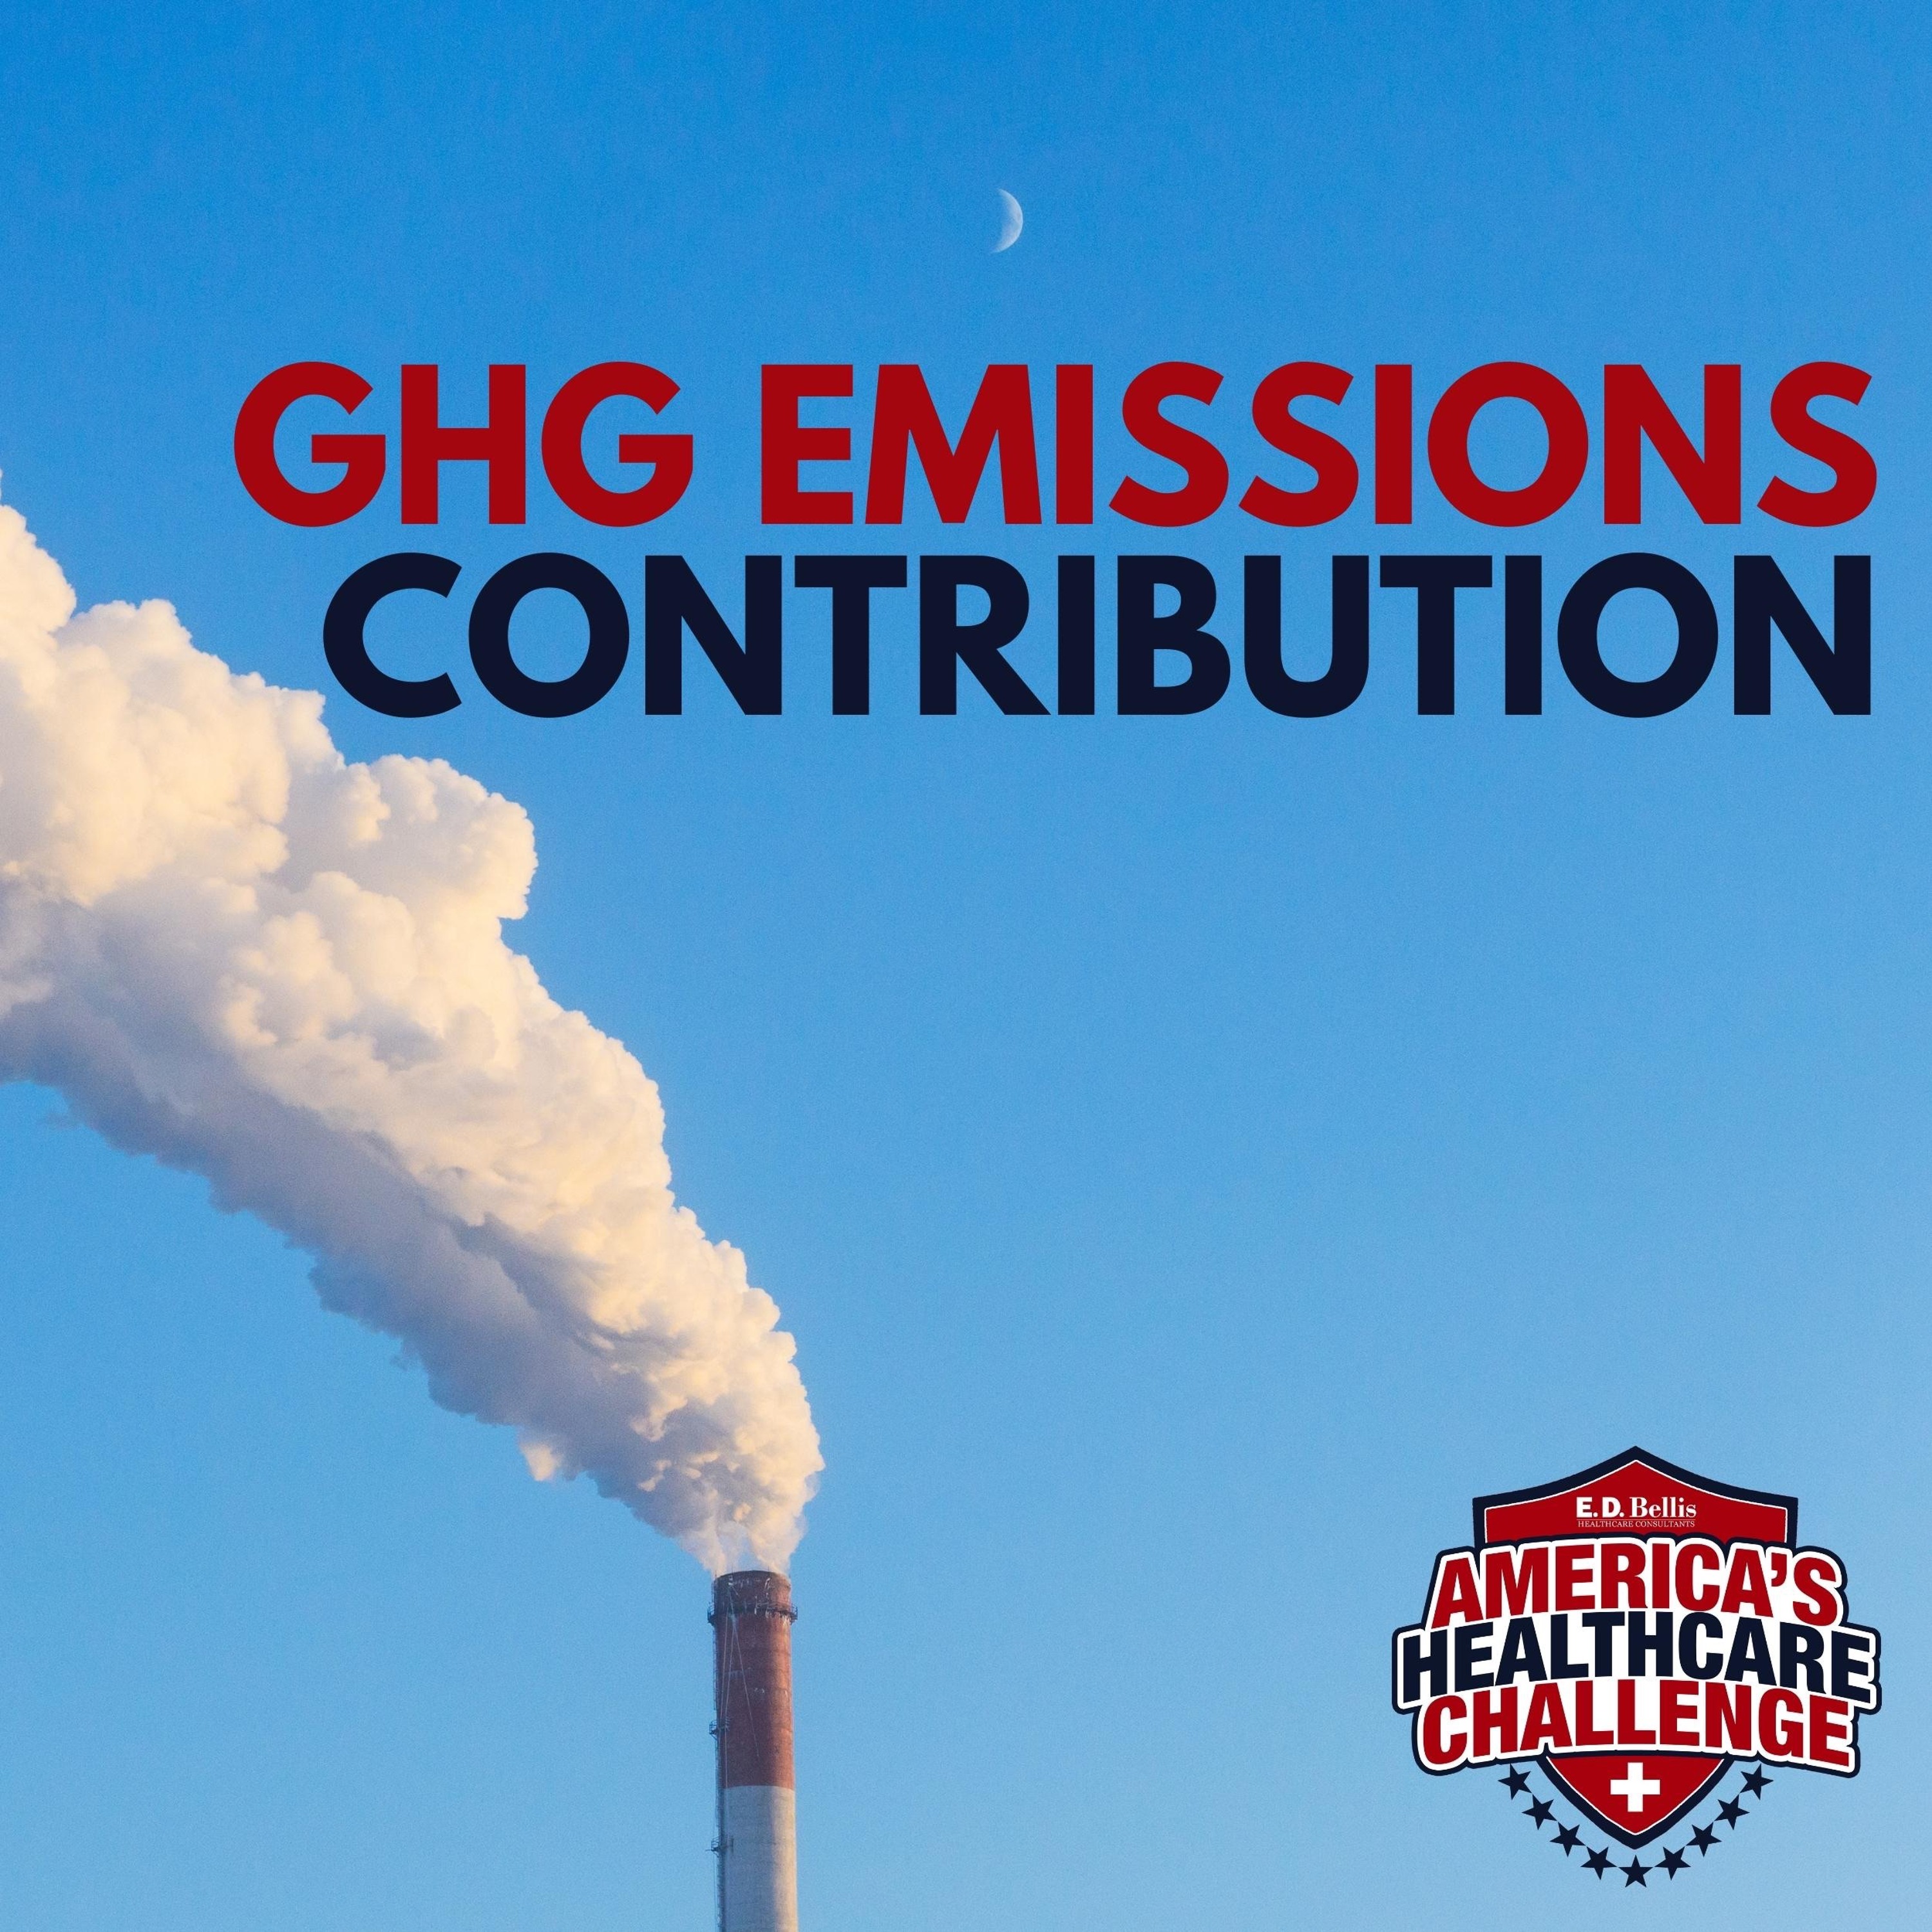 How Does the Healthcare Sector Contribute to GHG Emissions